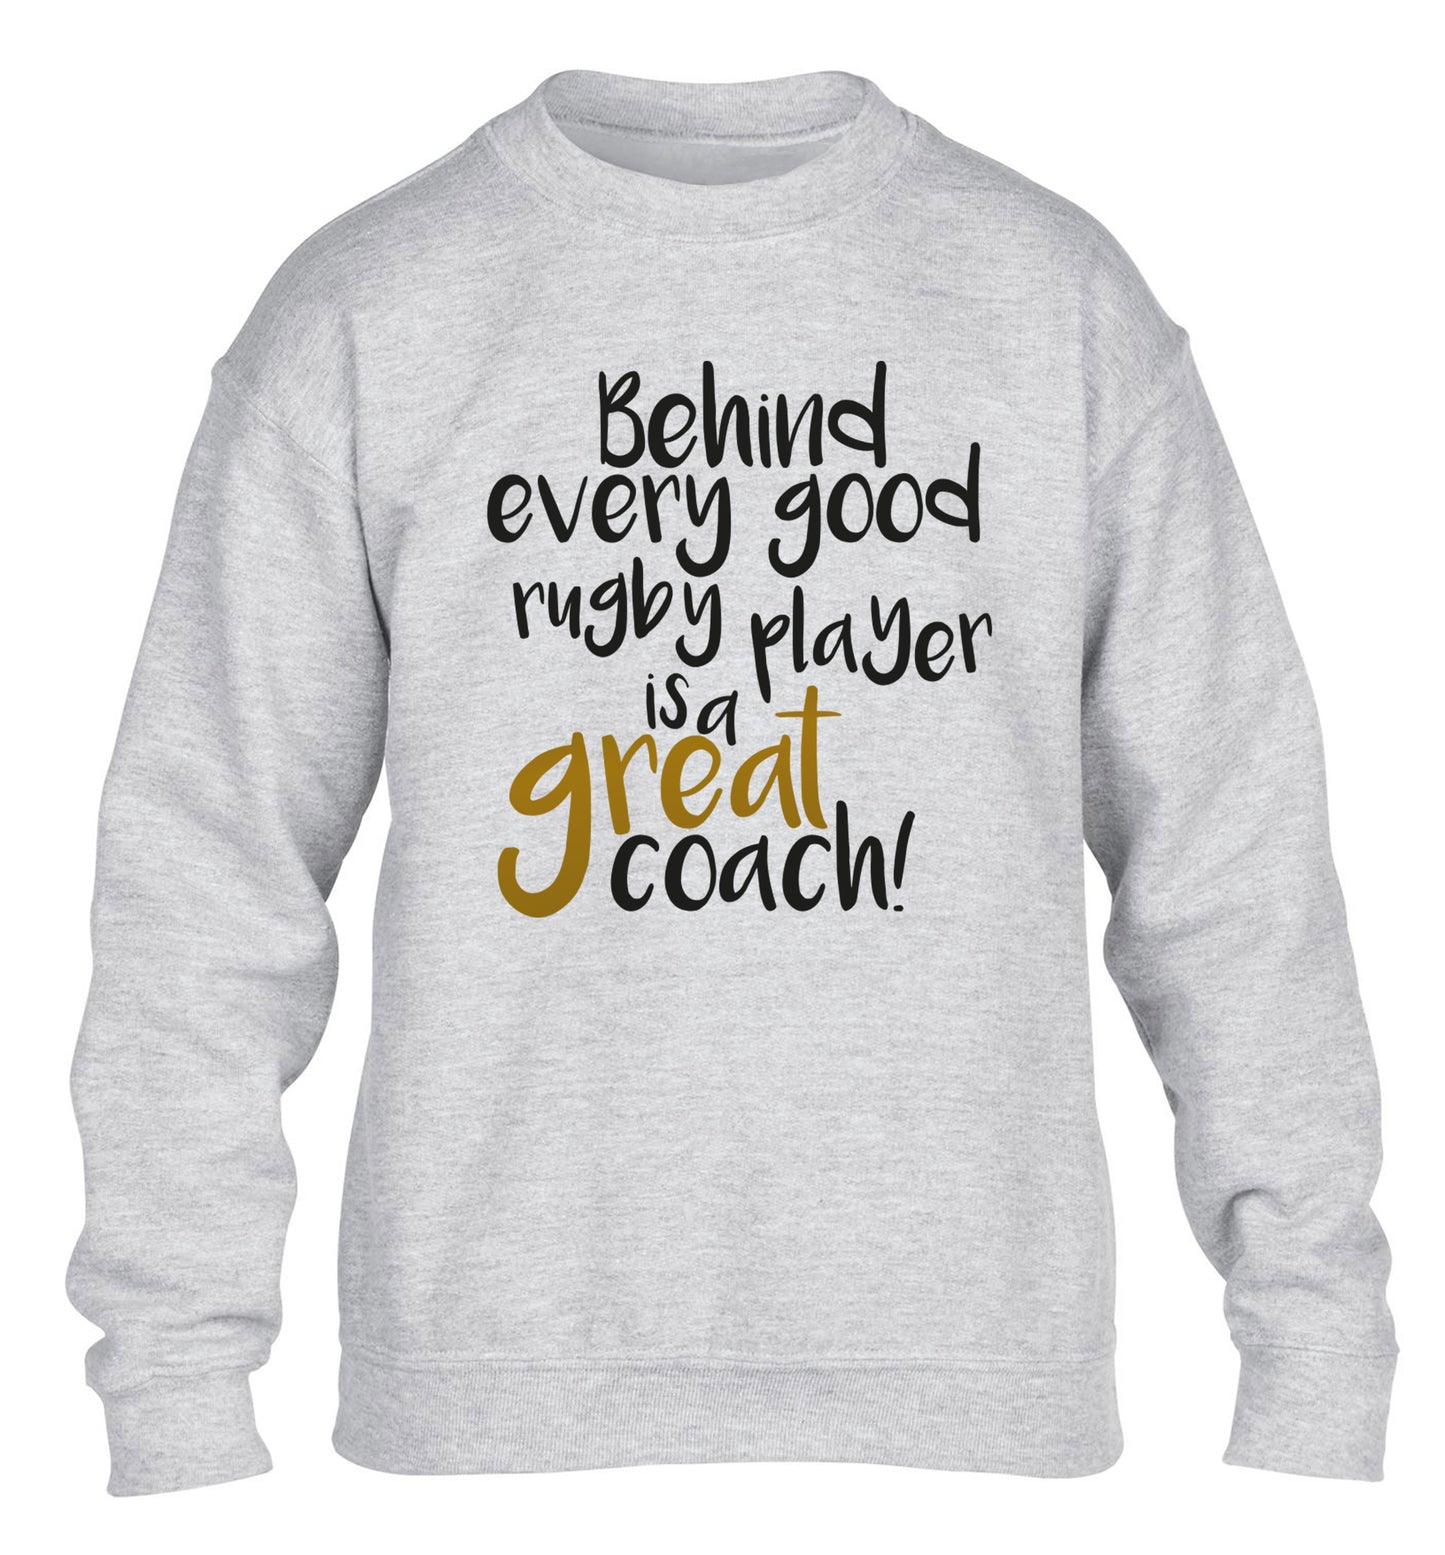 Behind every goor rugby player is a great coach children's grey sweater 12-13 Years